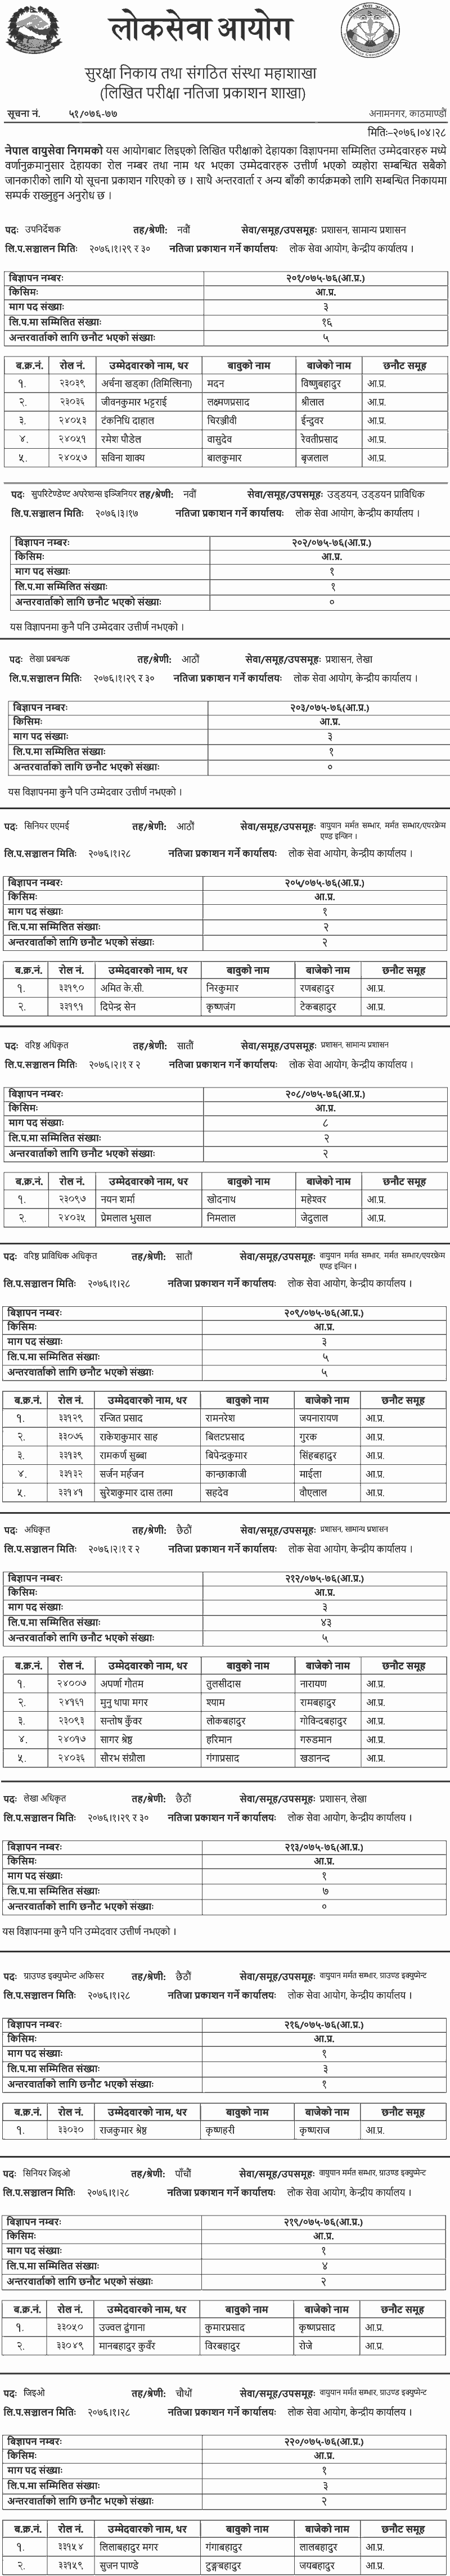 Nepal Airlines Corporation Written Exam Result